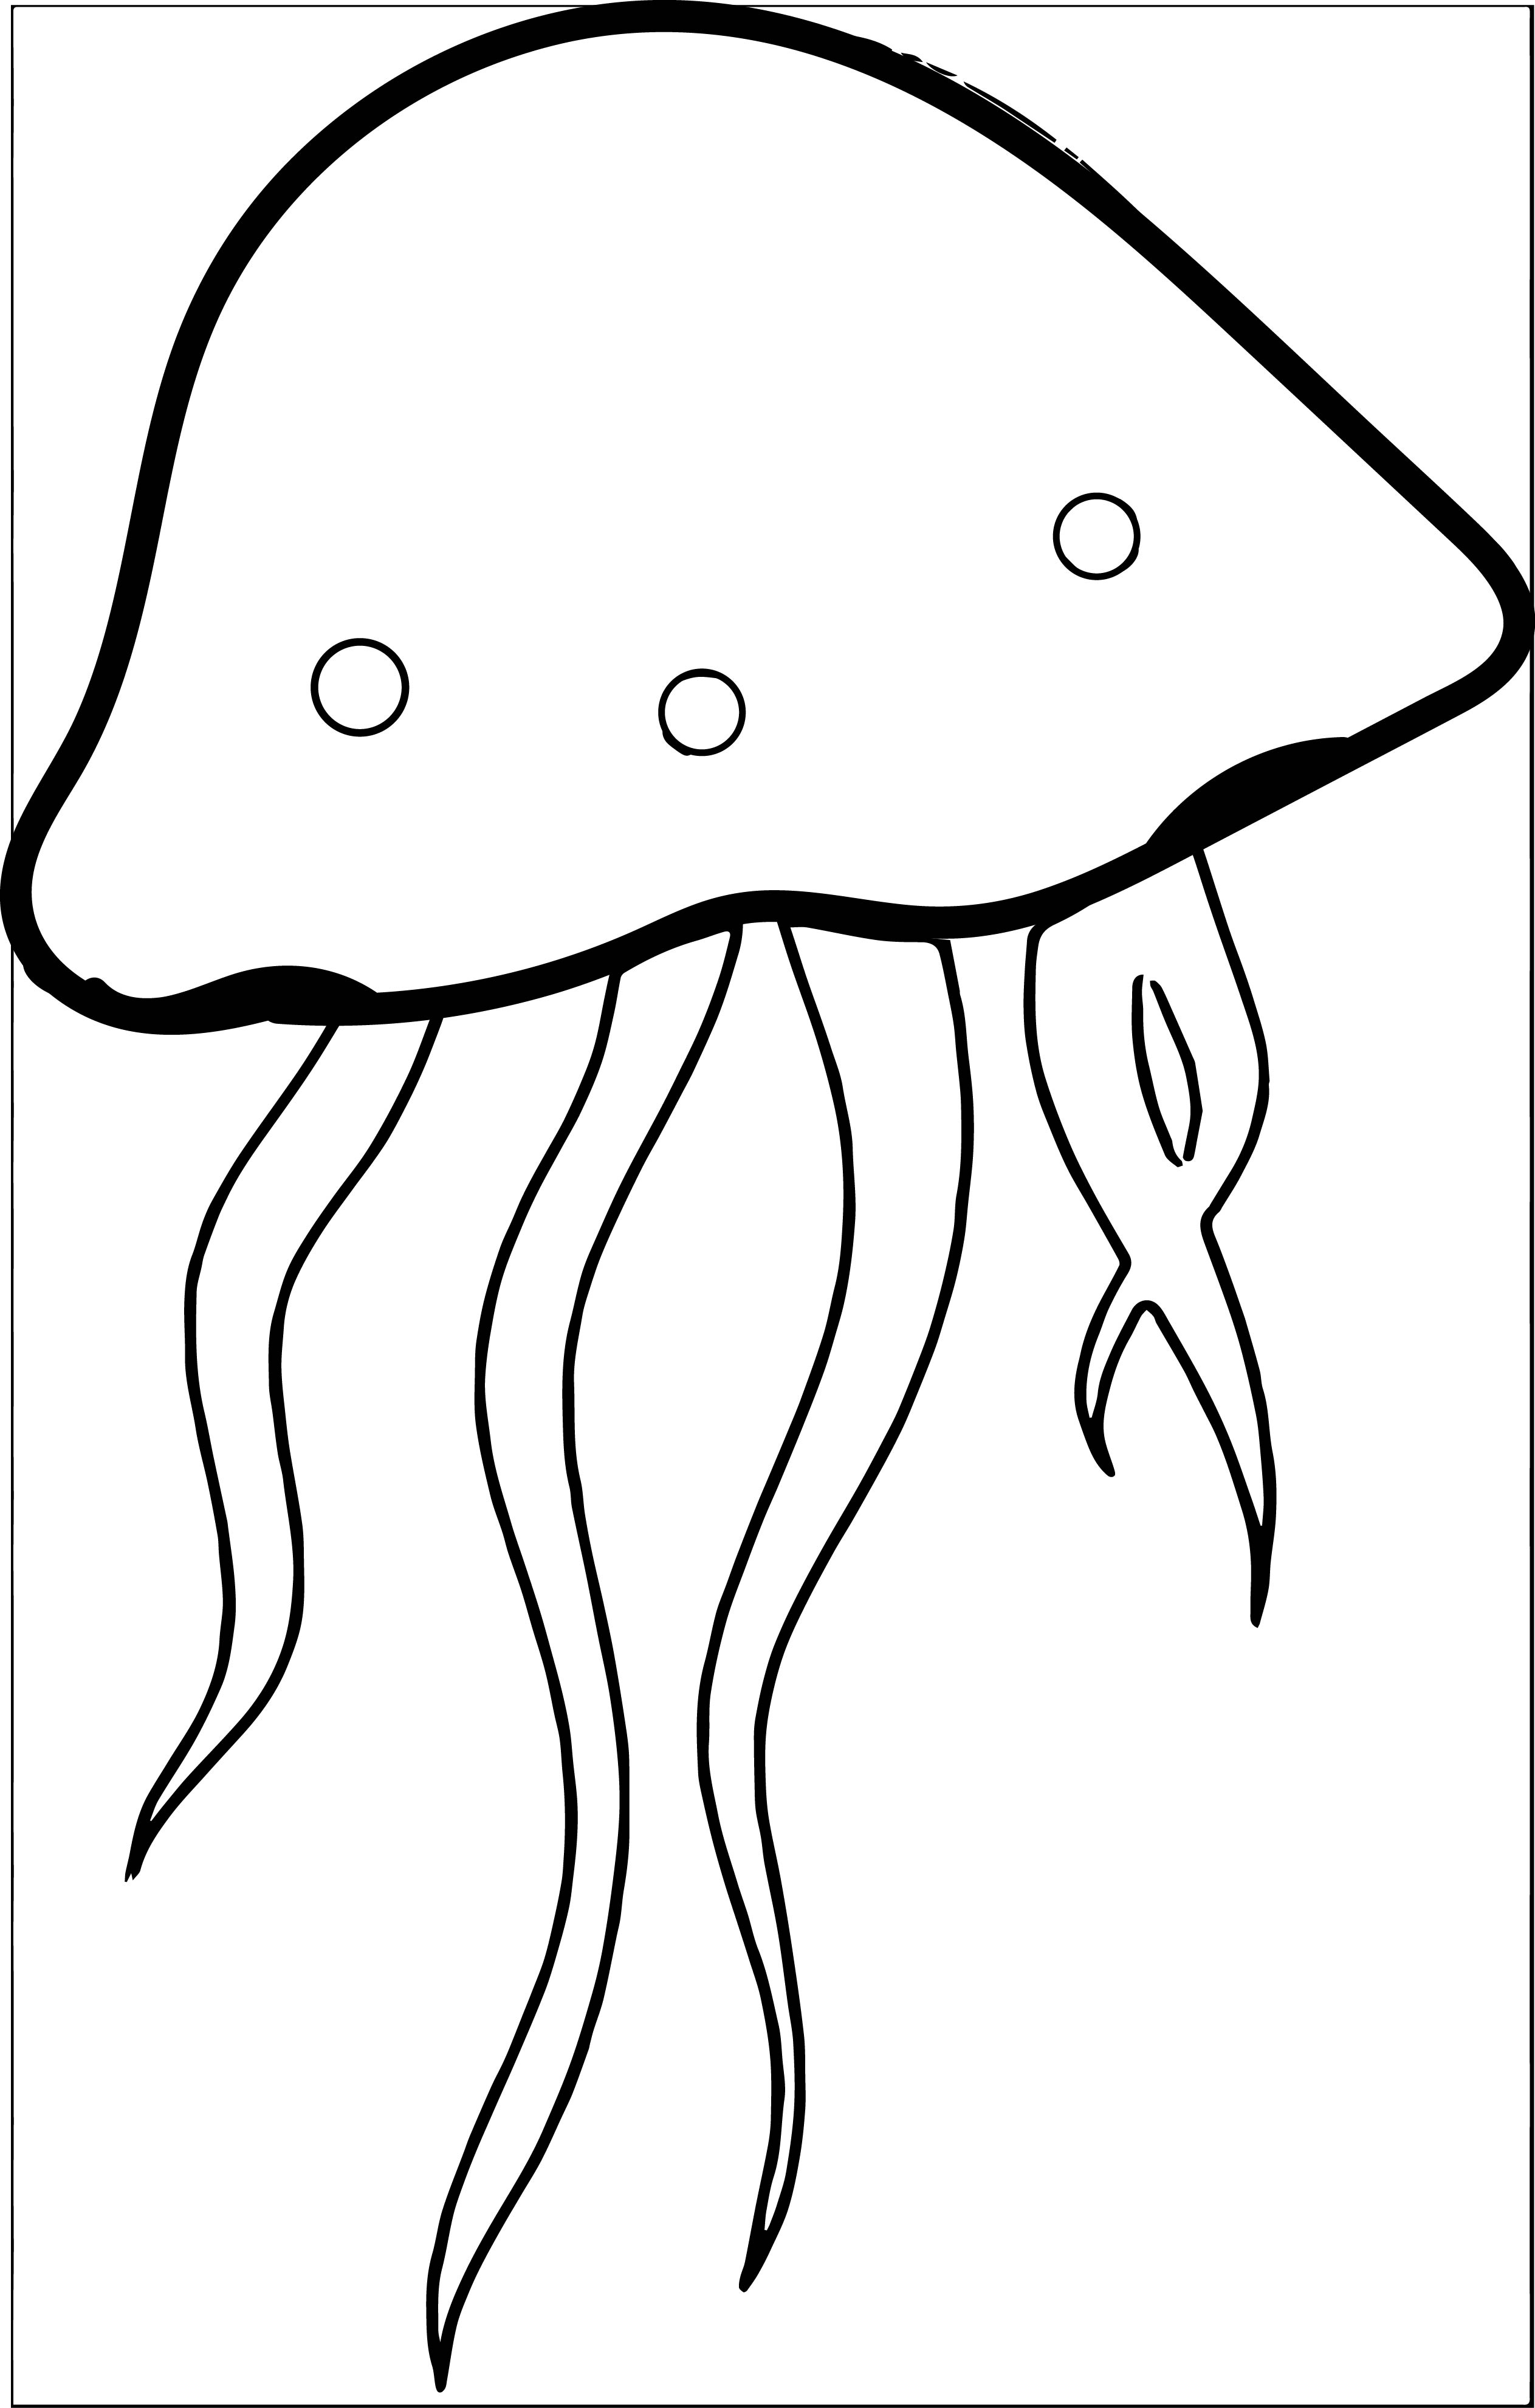 Jellyfish clipart black and white jelly fish